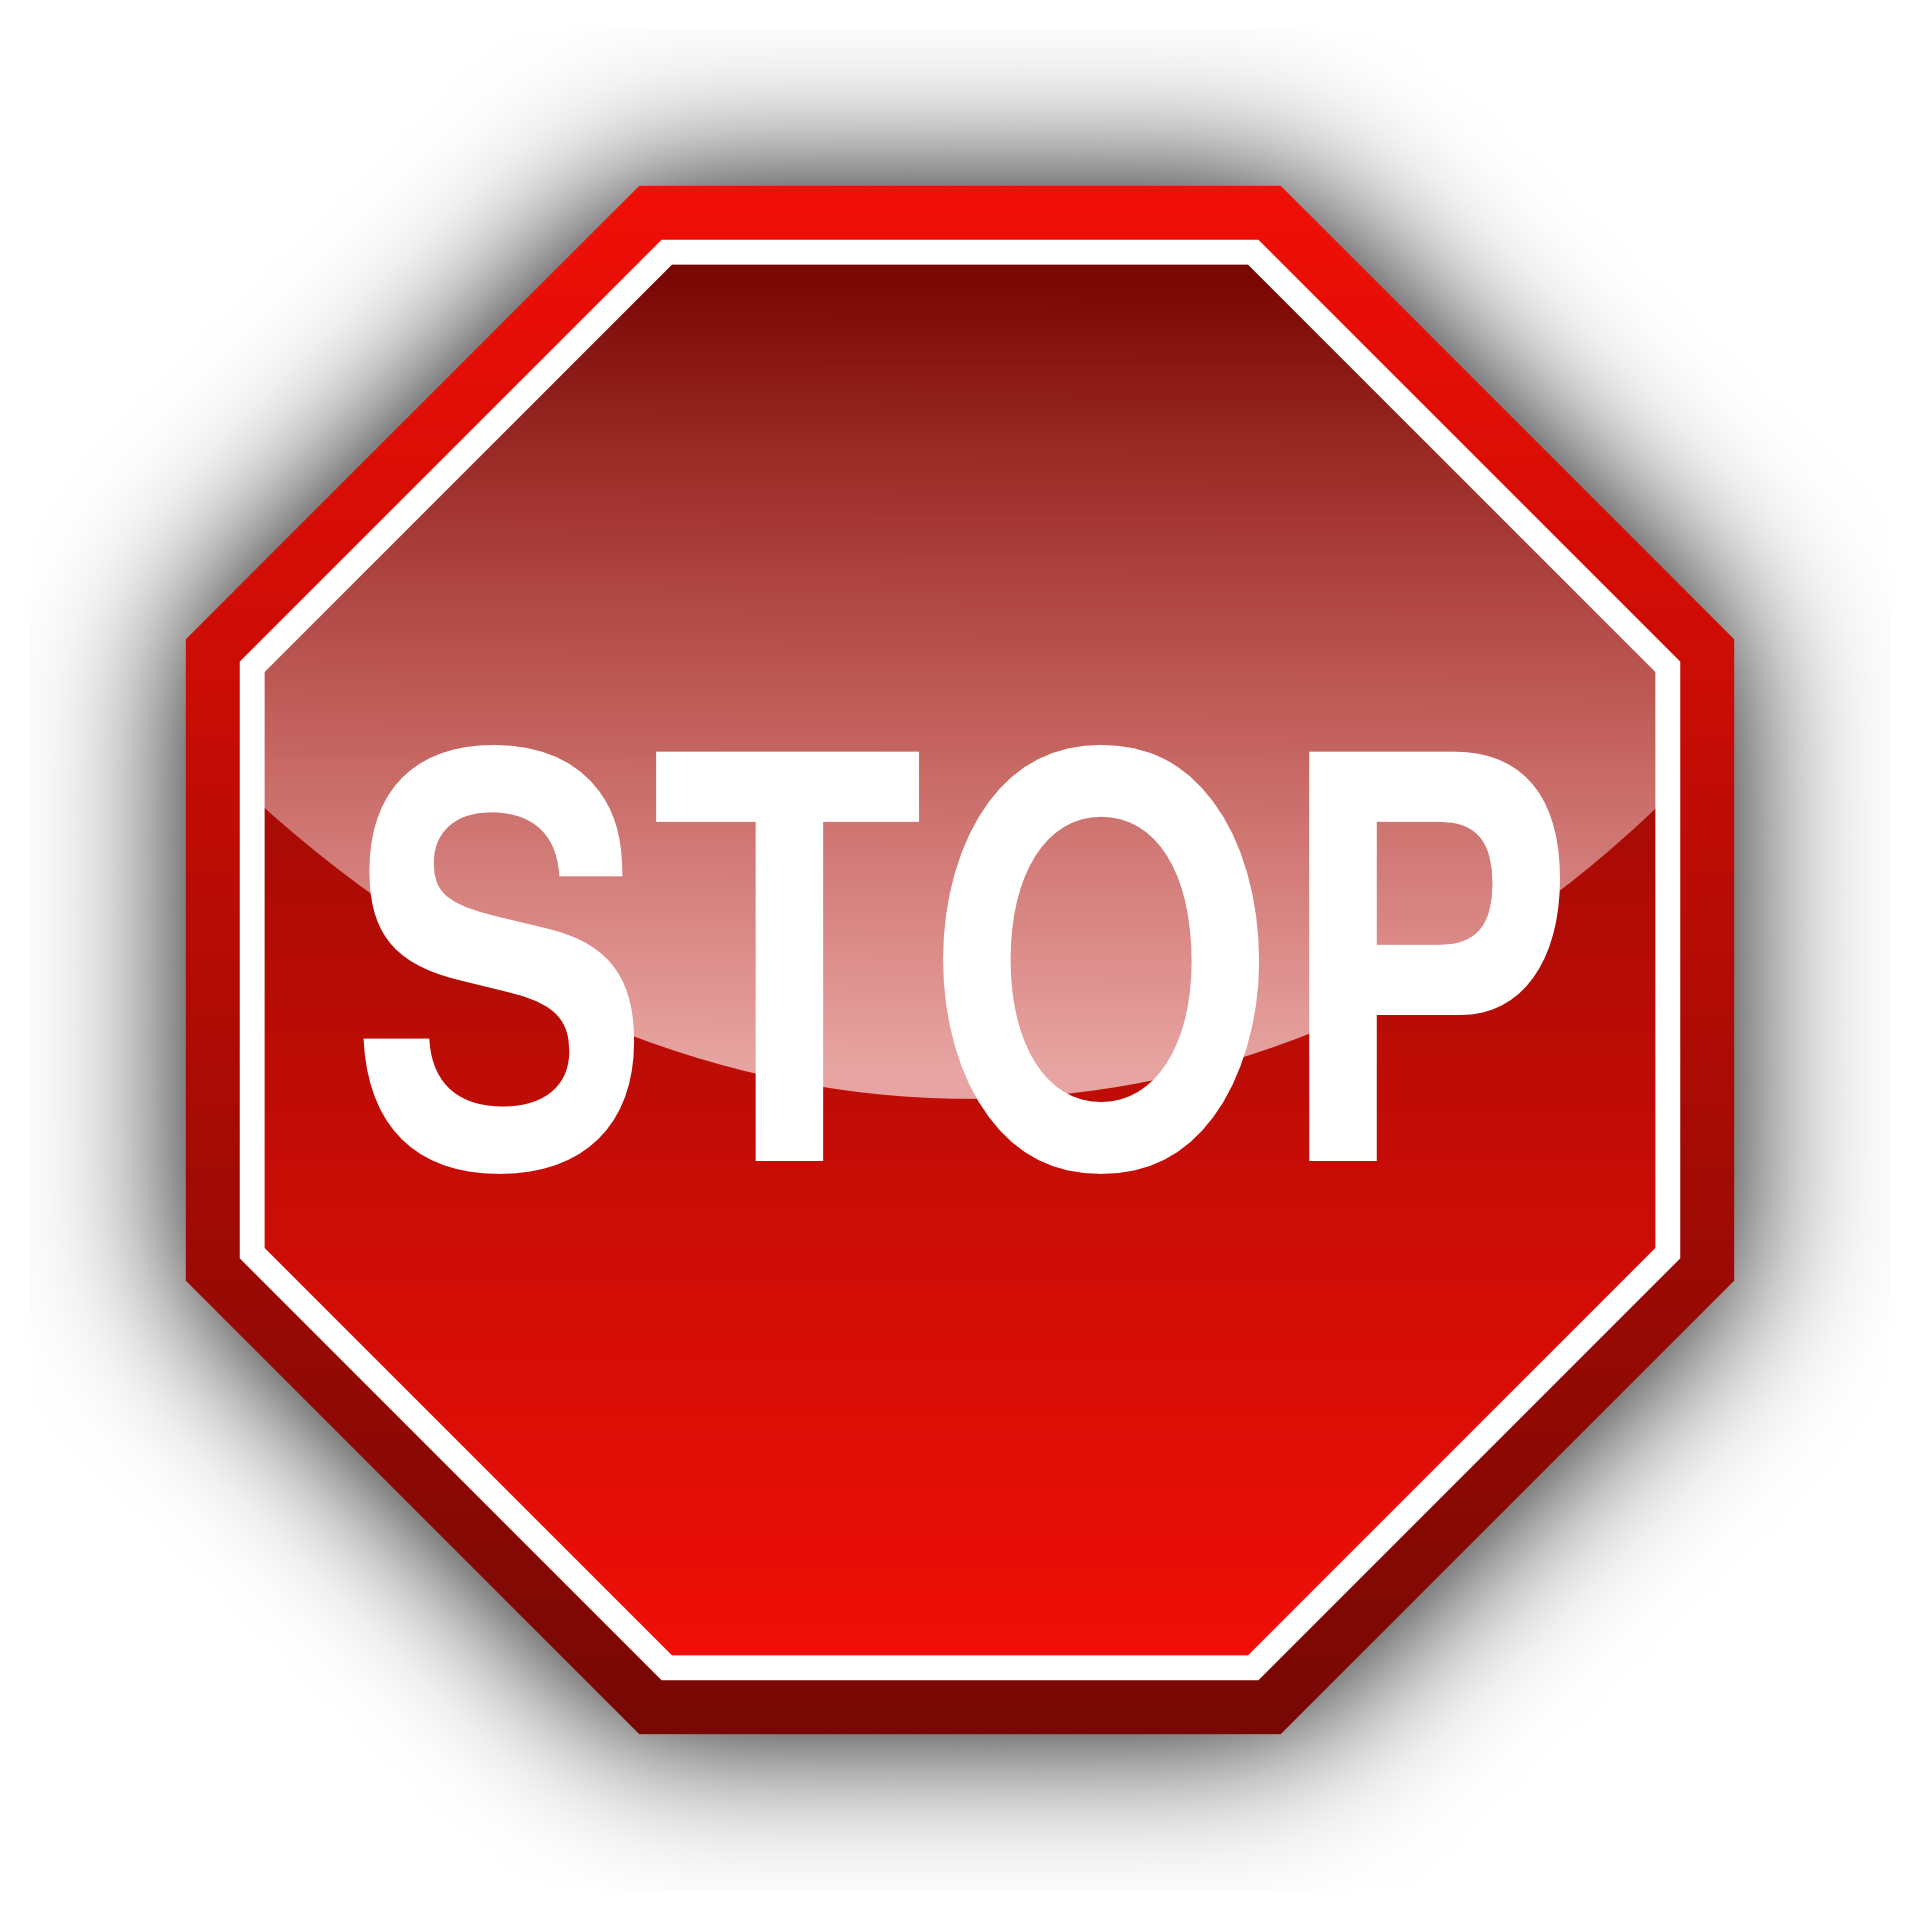 Red sign of stop,traffic vector